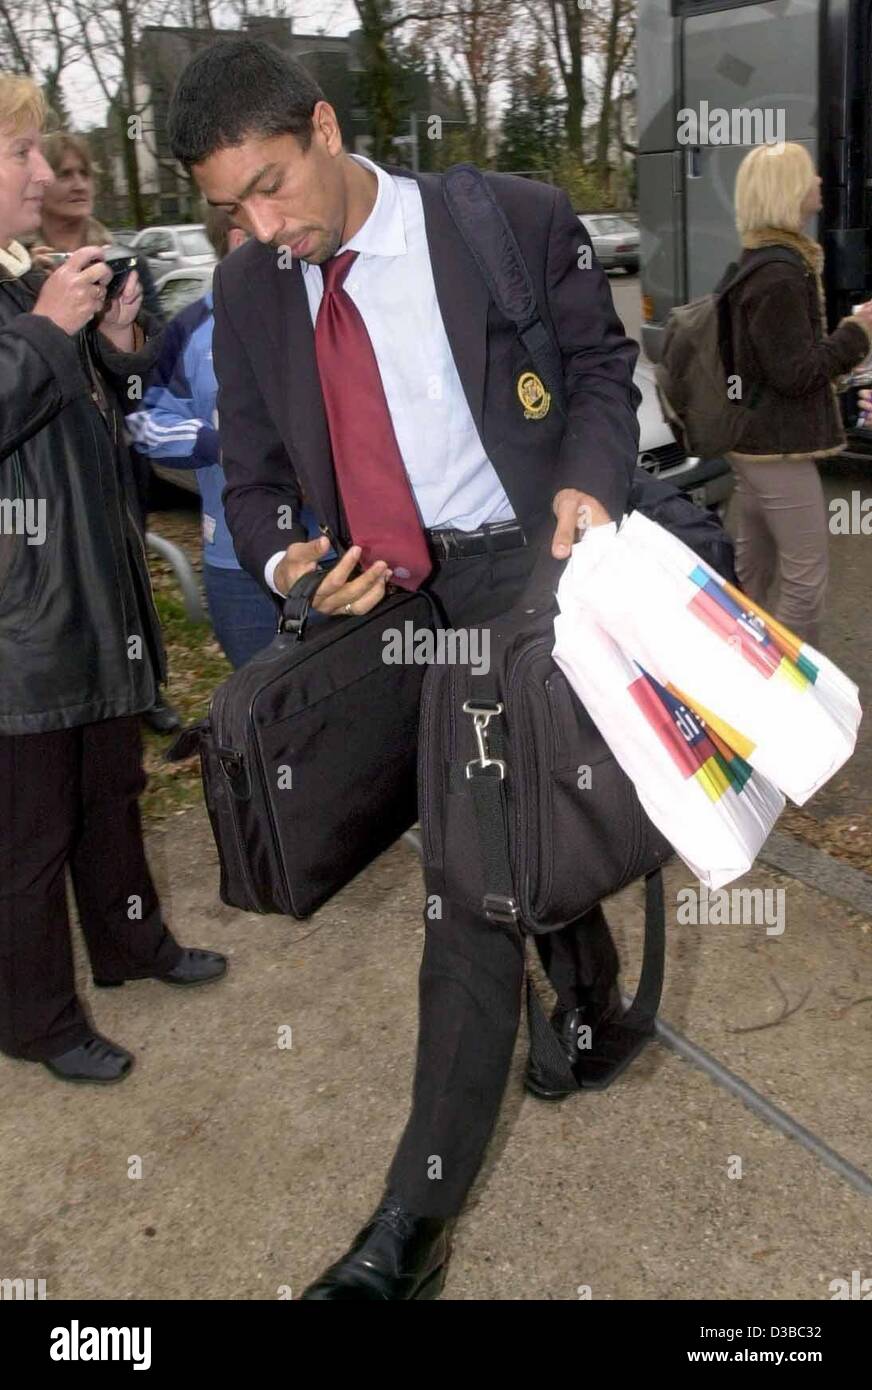 (dpa) - Bayern's Brazilian striker Giovane Elber leaves disappointedly the team bus after their arrival in Munich, 30 October 2002. The day before Bayern Munich had lost the Champions League soccer match against Deportivo La Coruna and will not progress to the Round of 16. Stock Photo